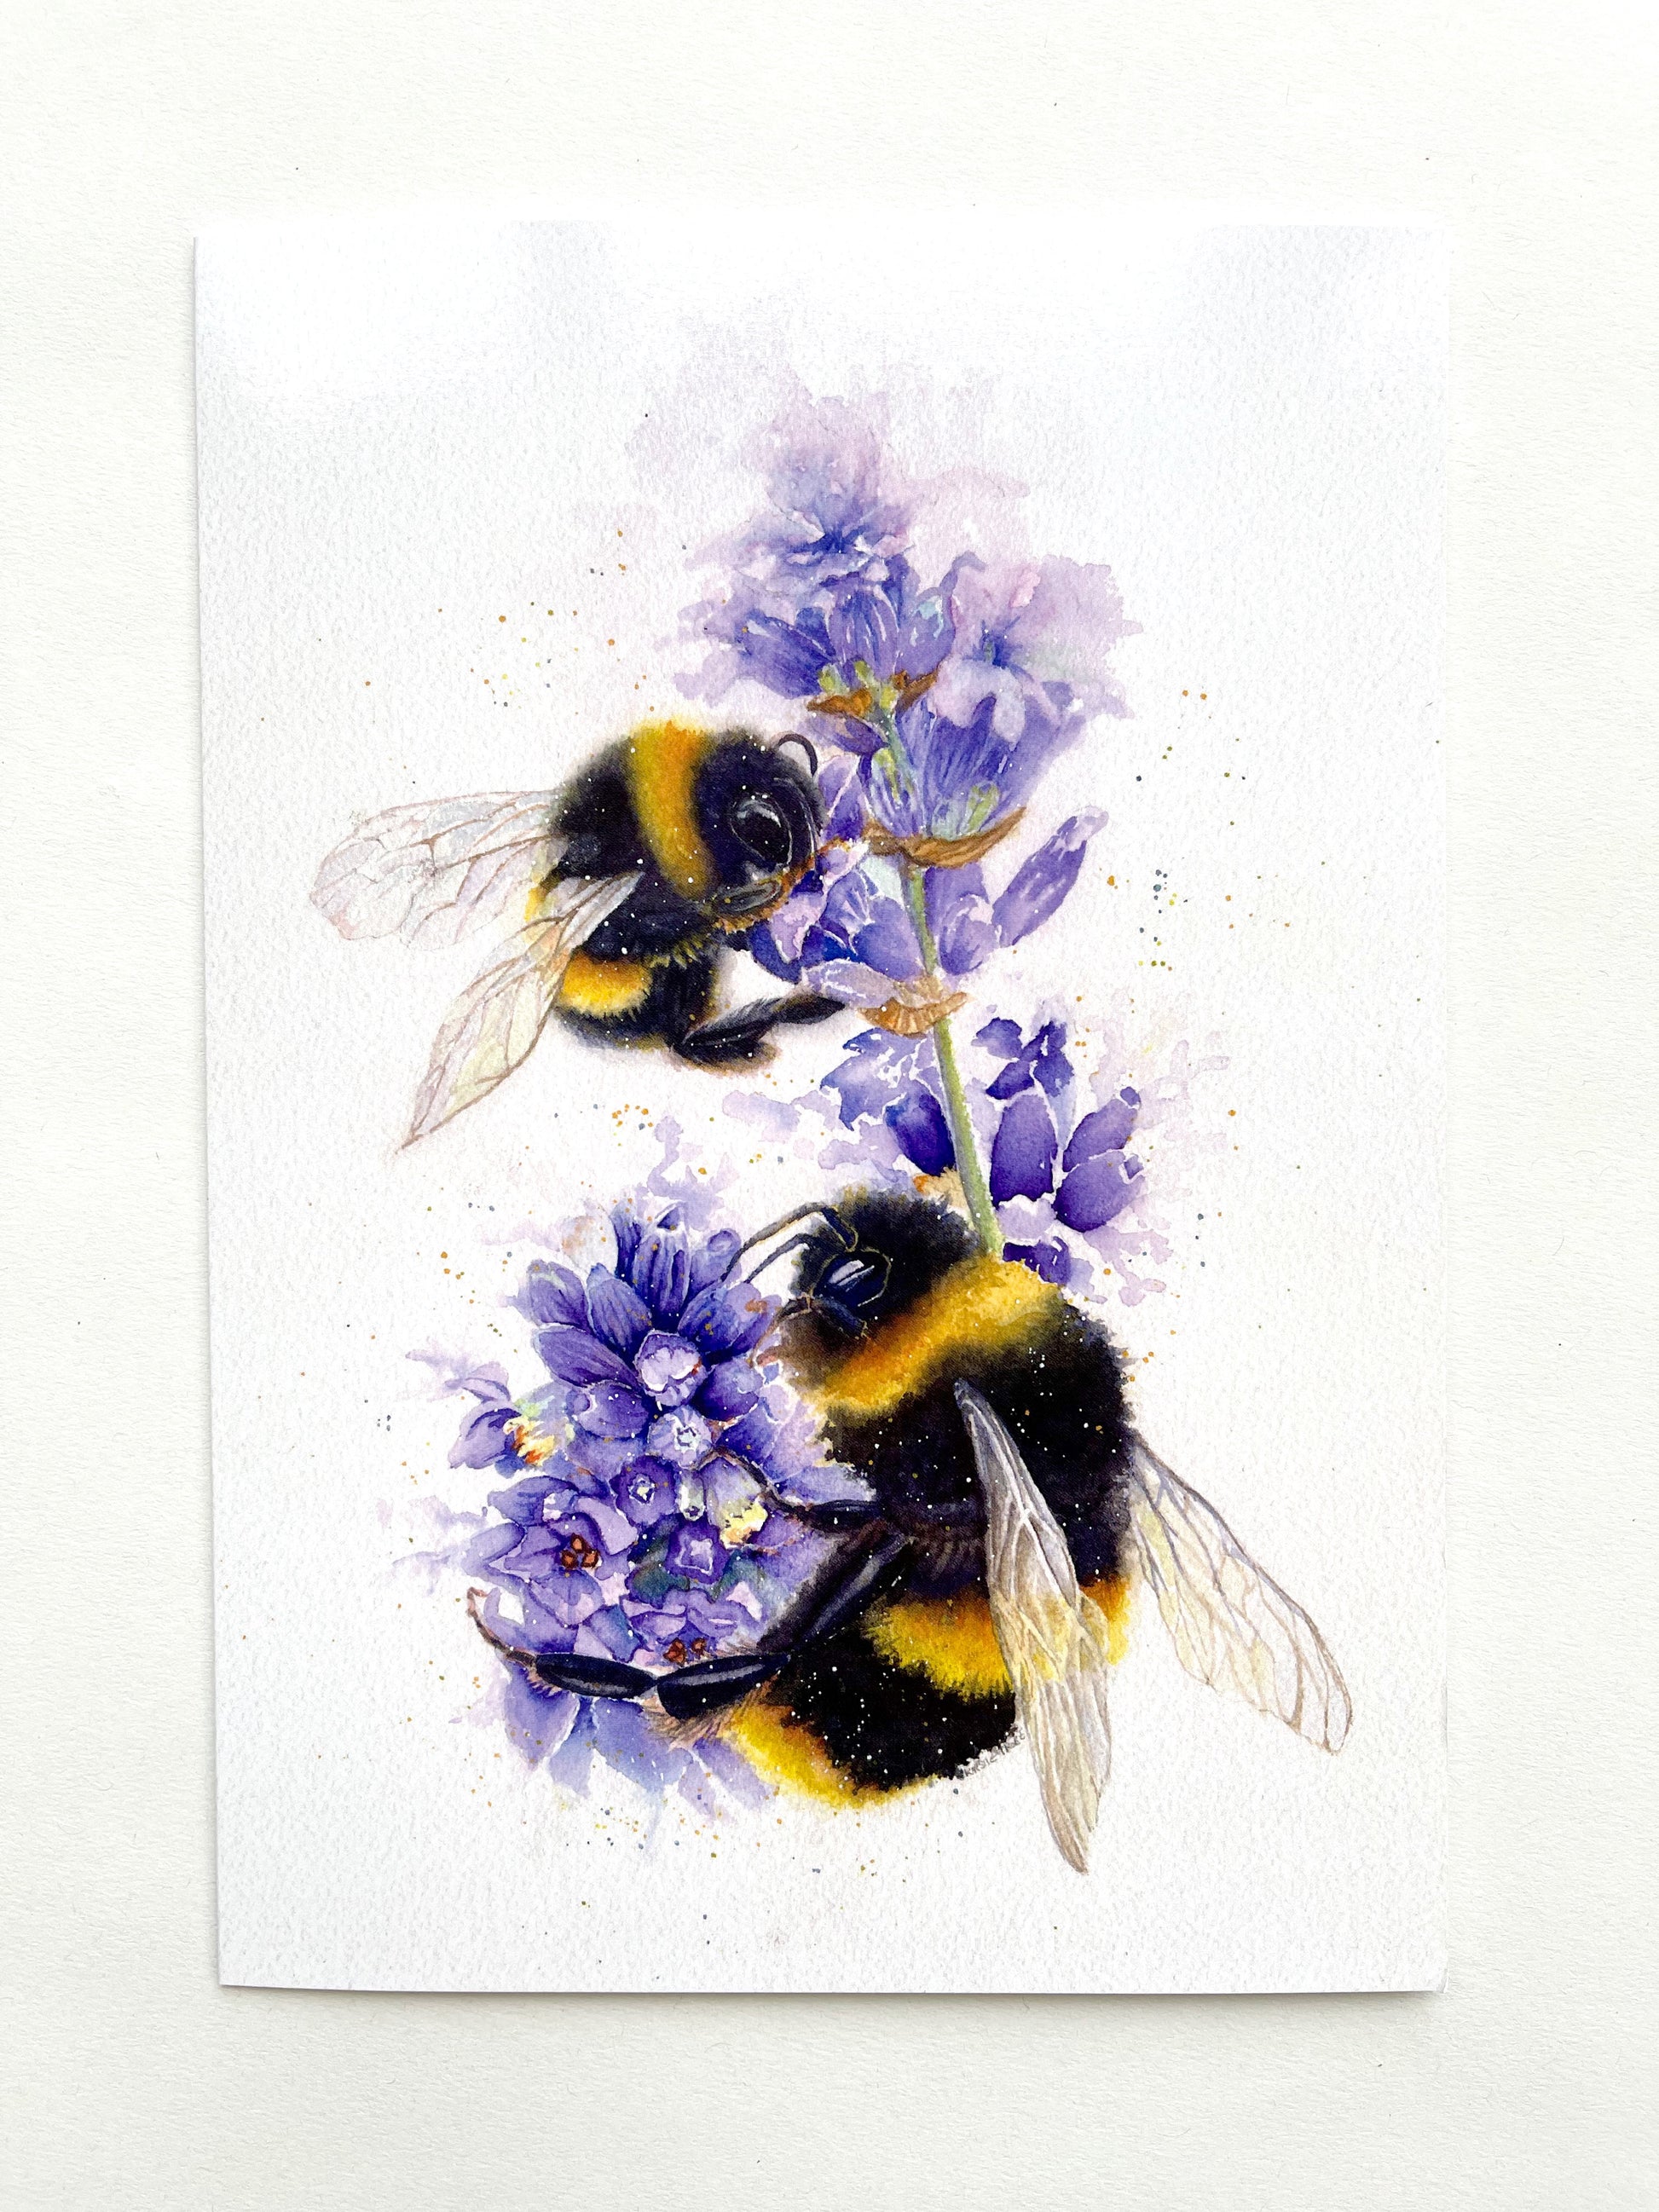 Two fluffy fuzzy bumble bees feed on two lavender flowers. They are depicted in a portrait fashion, the top bee is smaller and further away. The bees form a Ying and Yang shape.